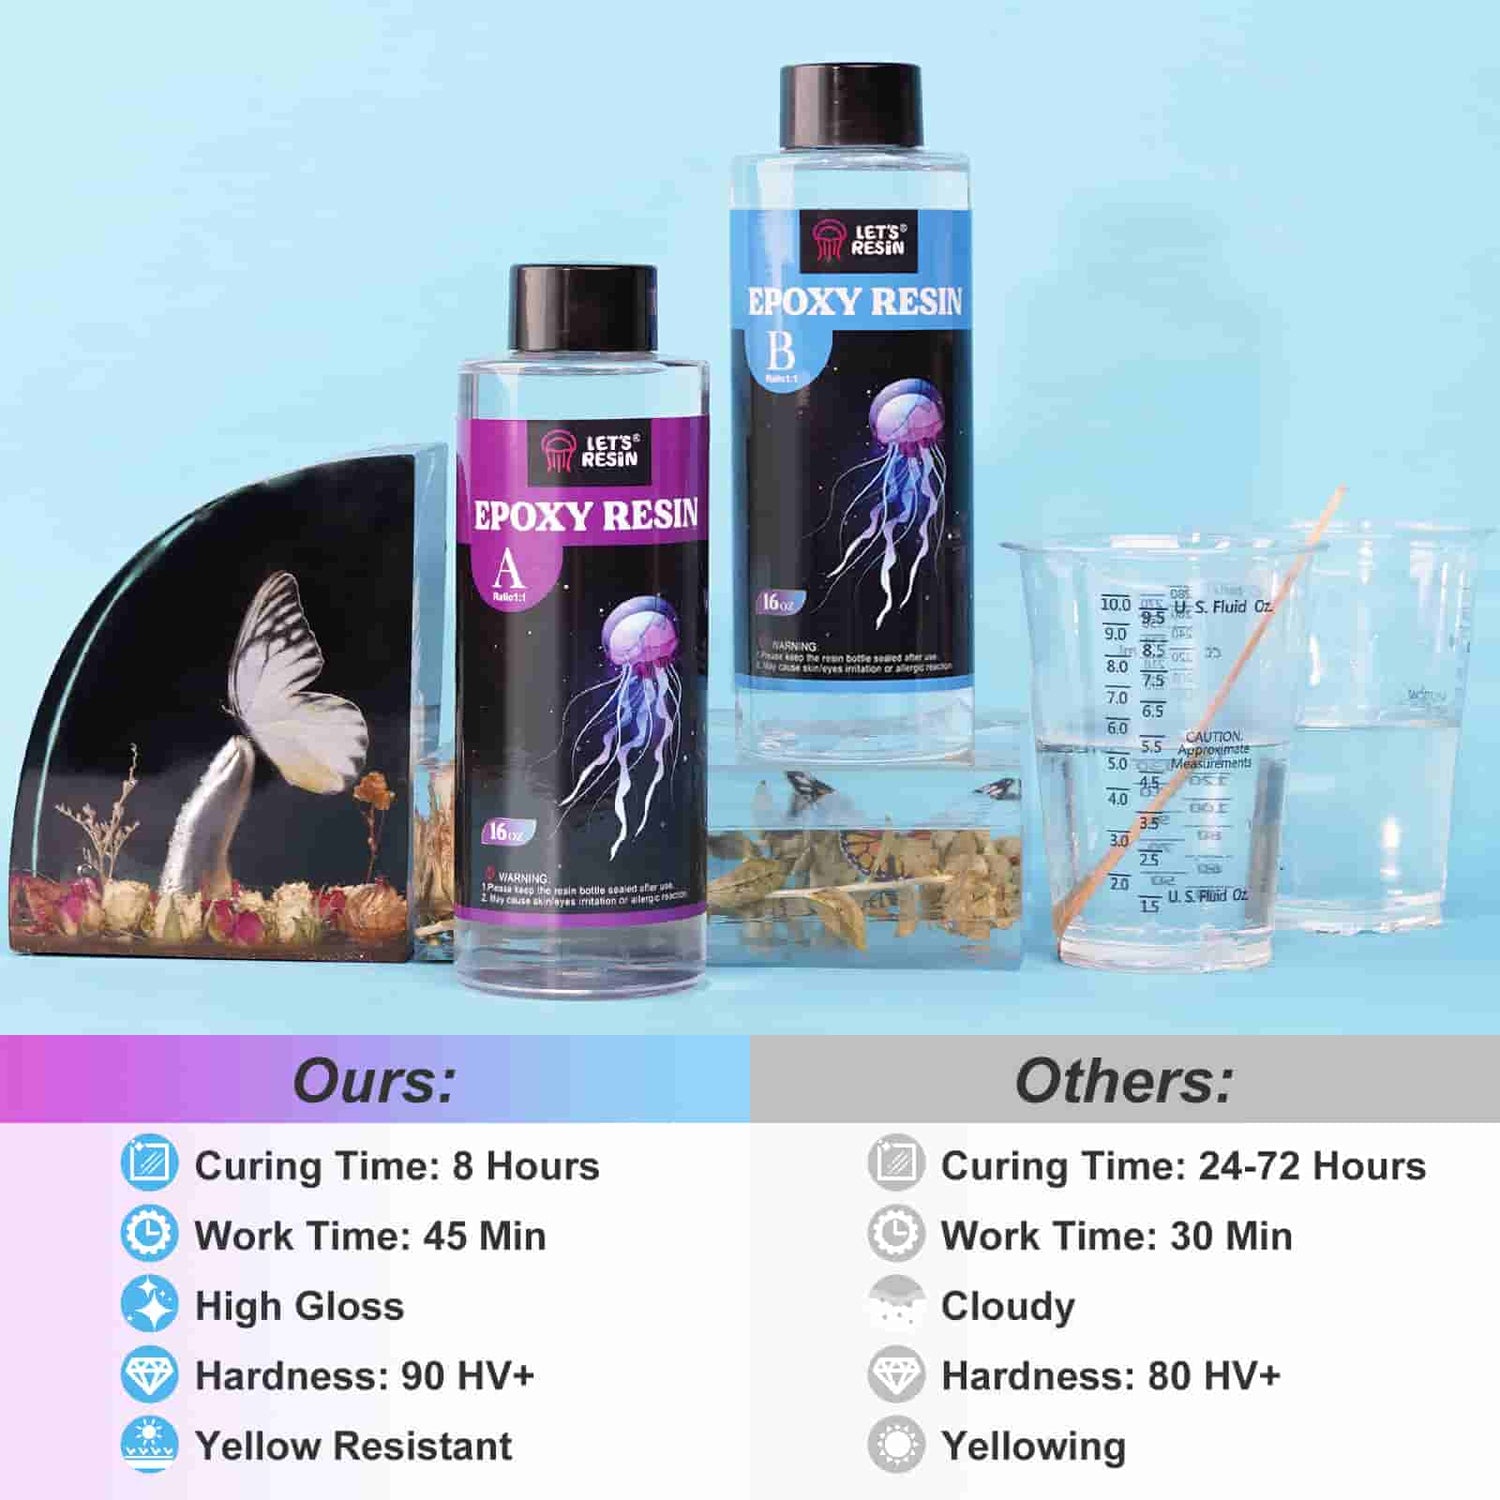 32oz Epoxy Resin Kit Artresin Crystal Clear and Glossy Finish